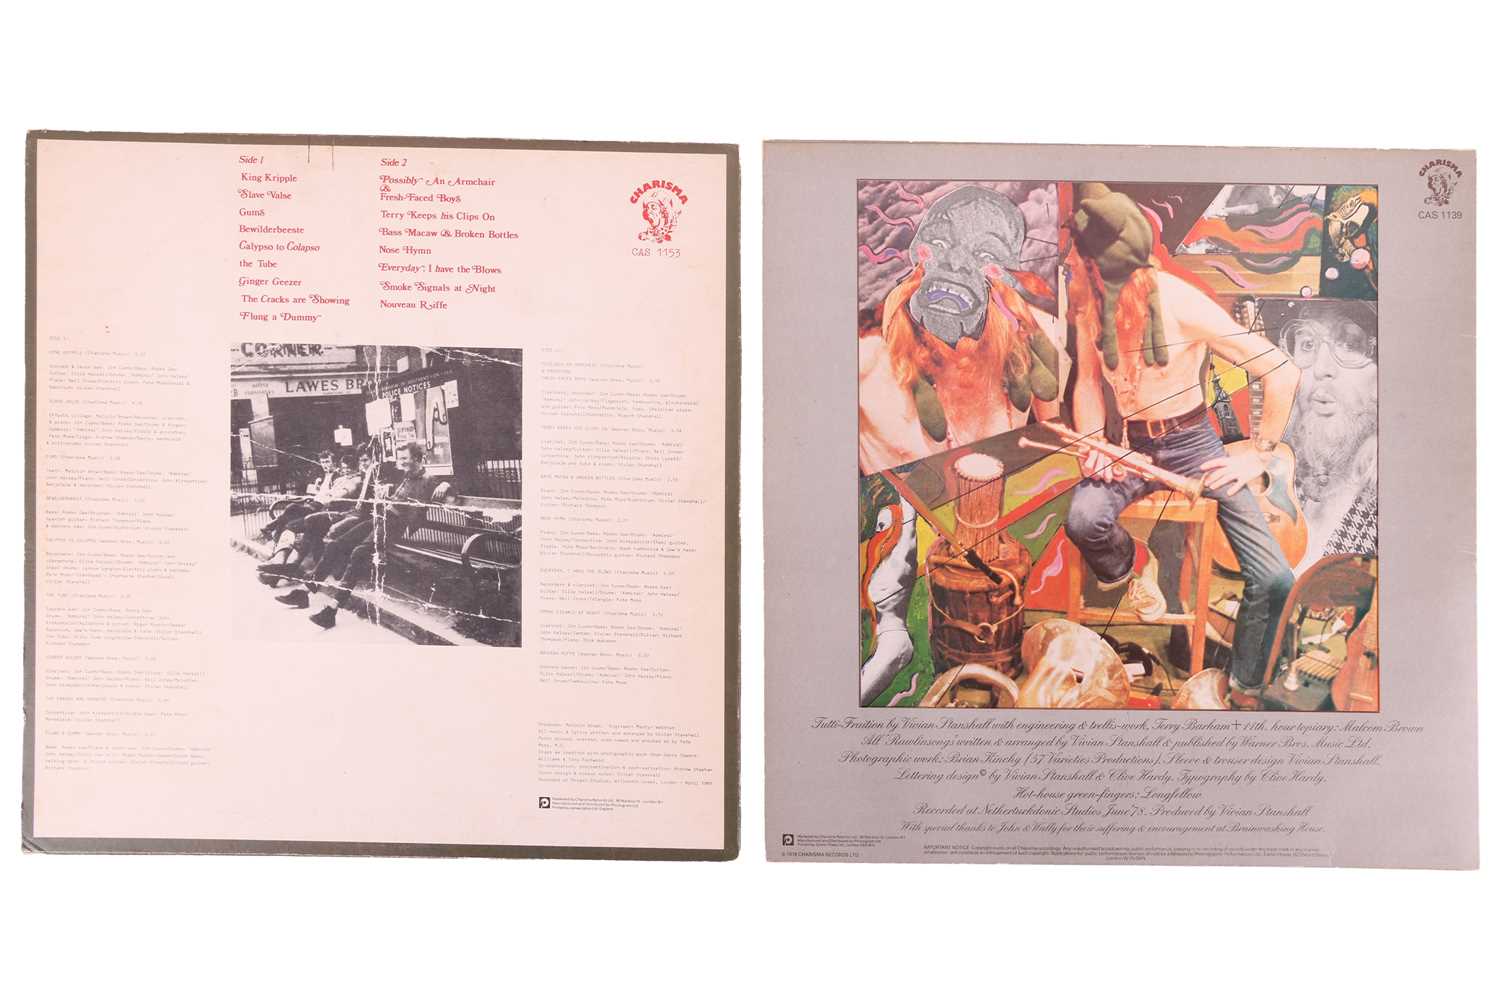 From the personal collection of Vivian Stanshall, an original release of the album 'Sir Henry at Raw - Image 2 of 6